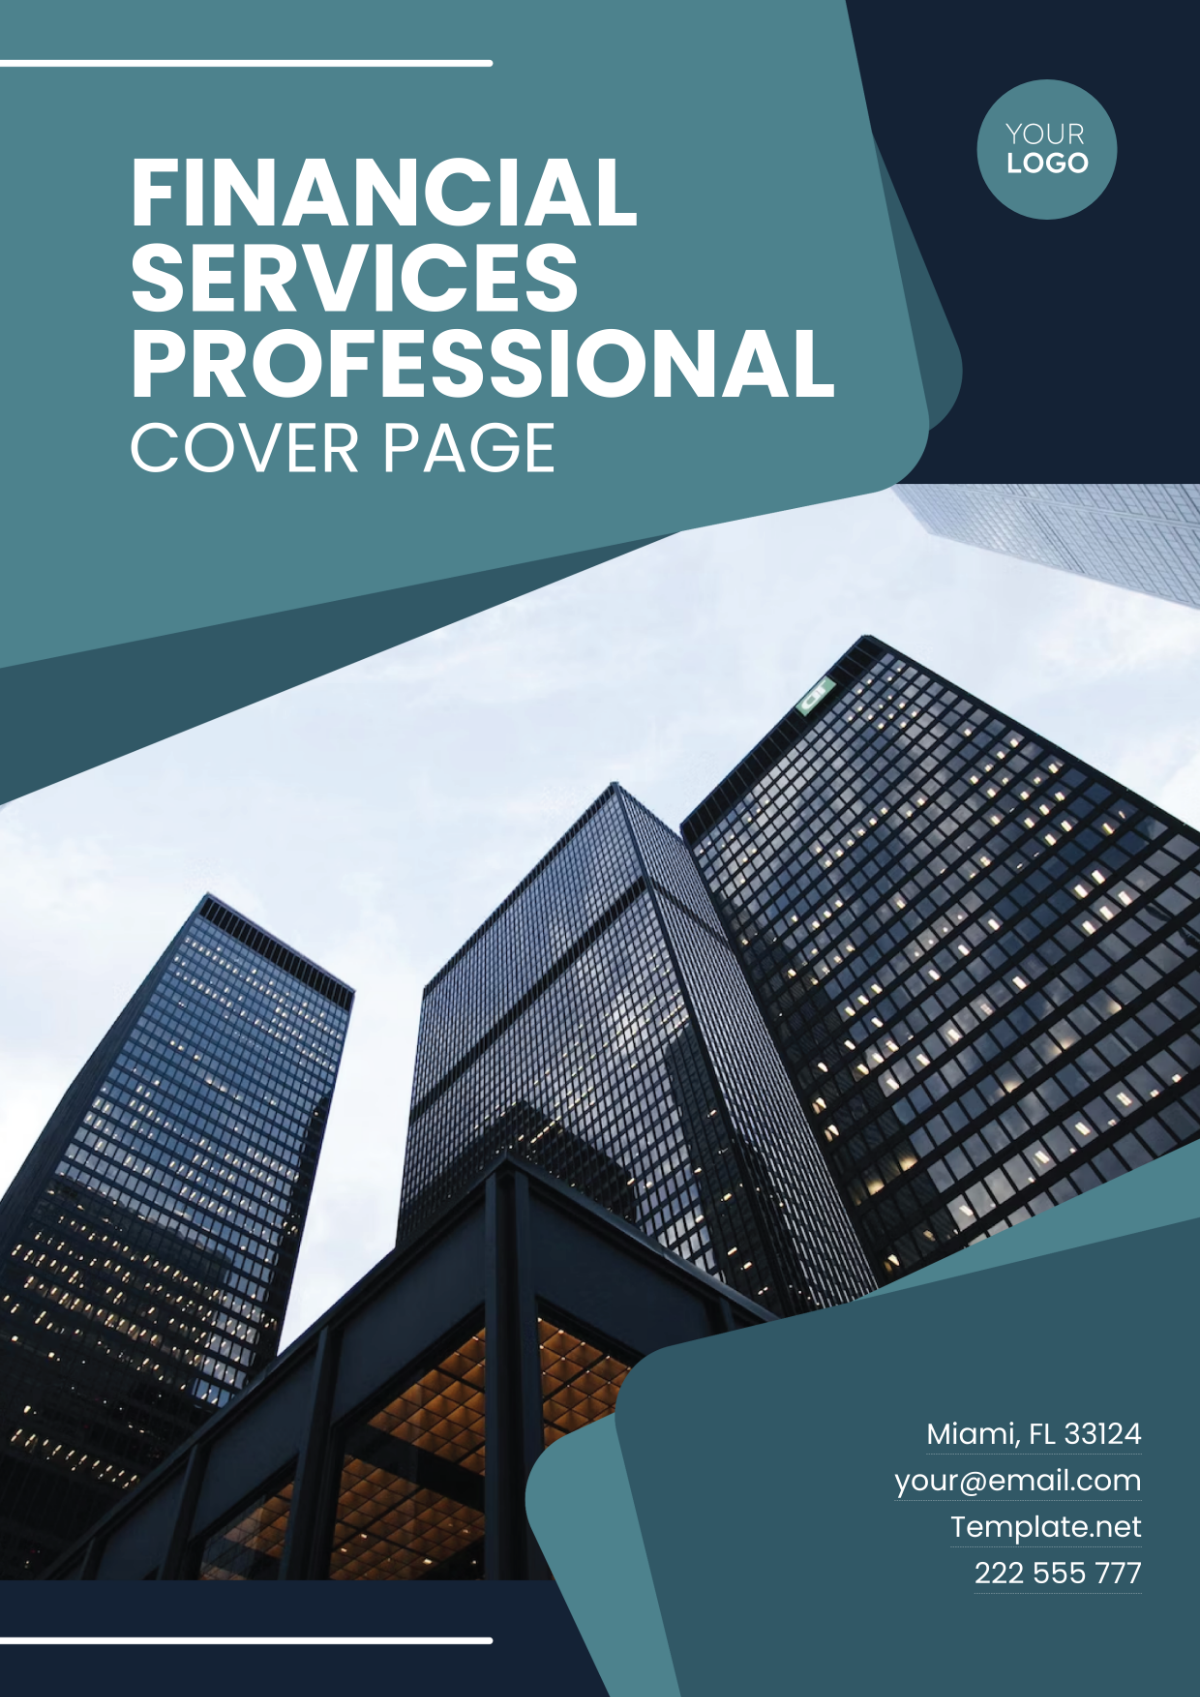 Financial Services Professional Cover Page